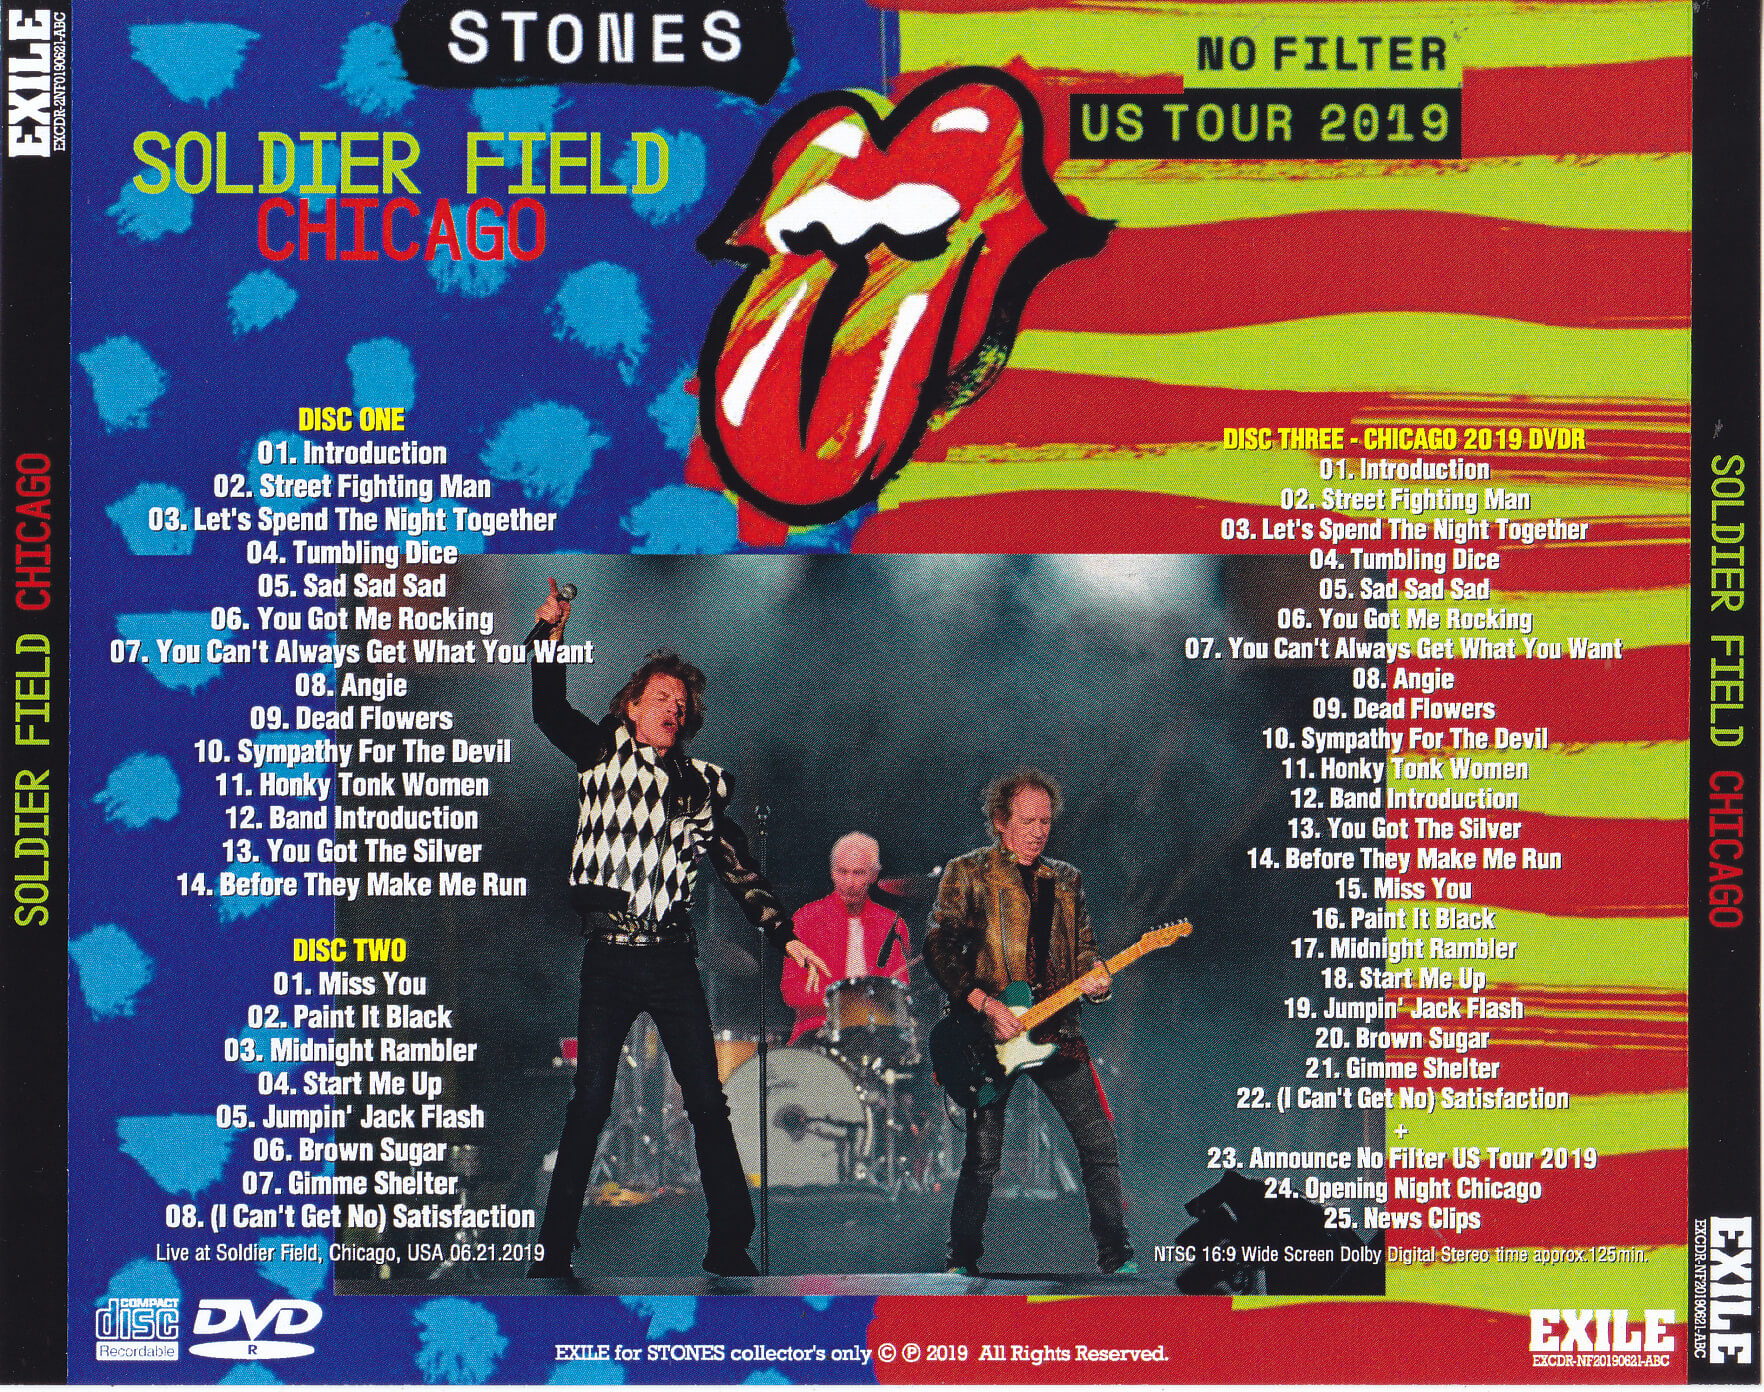 Rolling Stones / No Filter US Tour 2019 Soldier Field Chicago